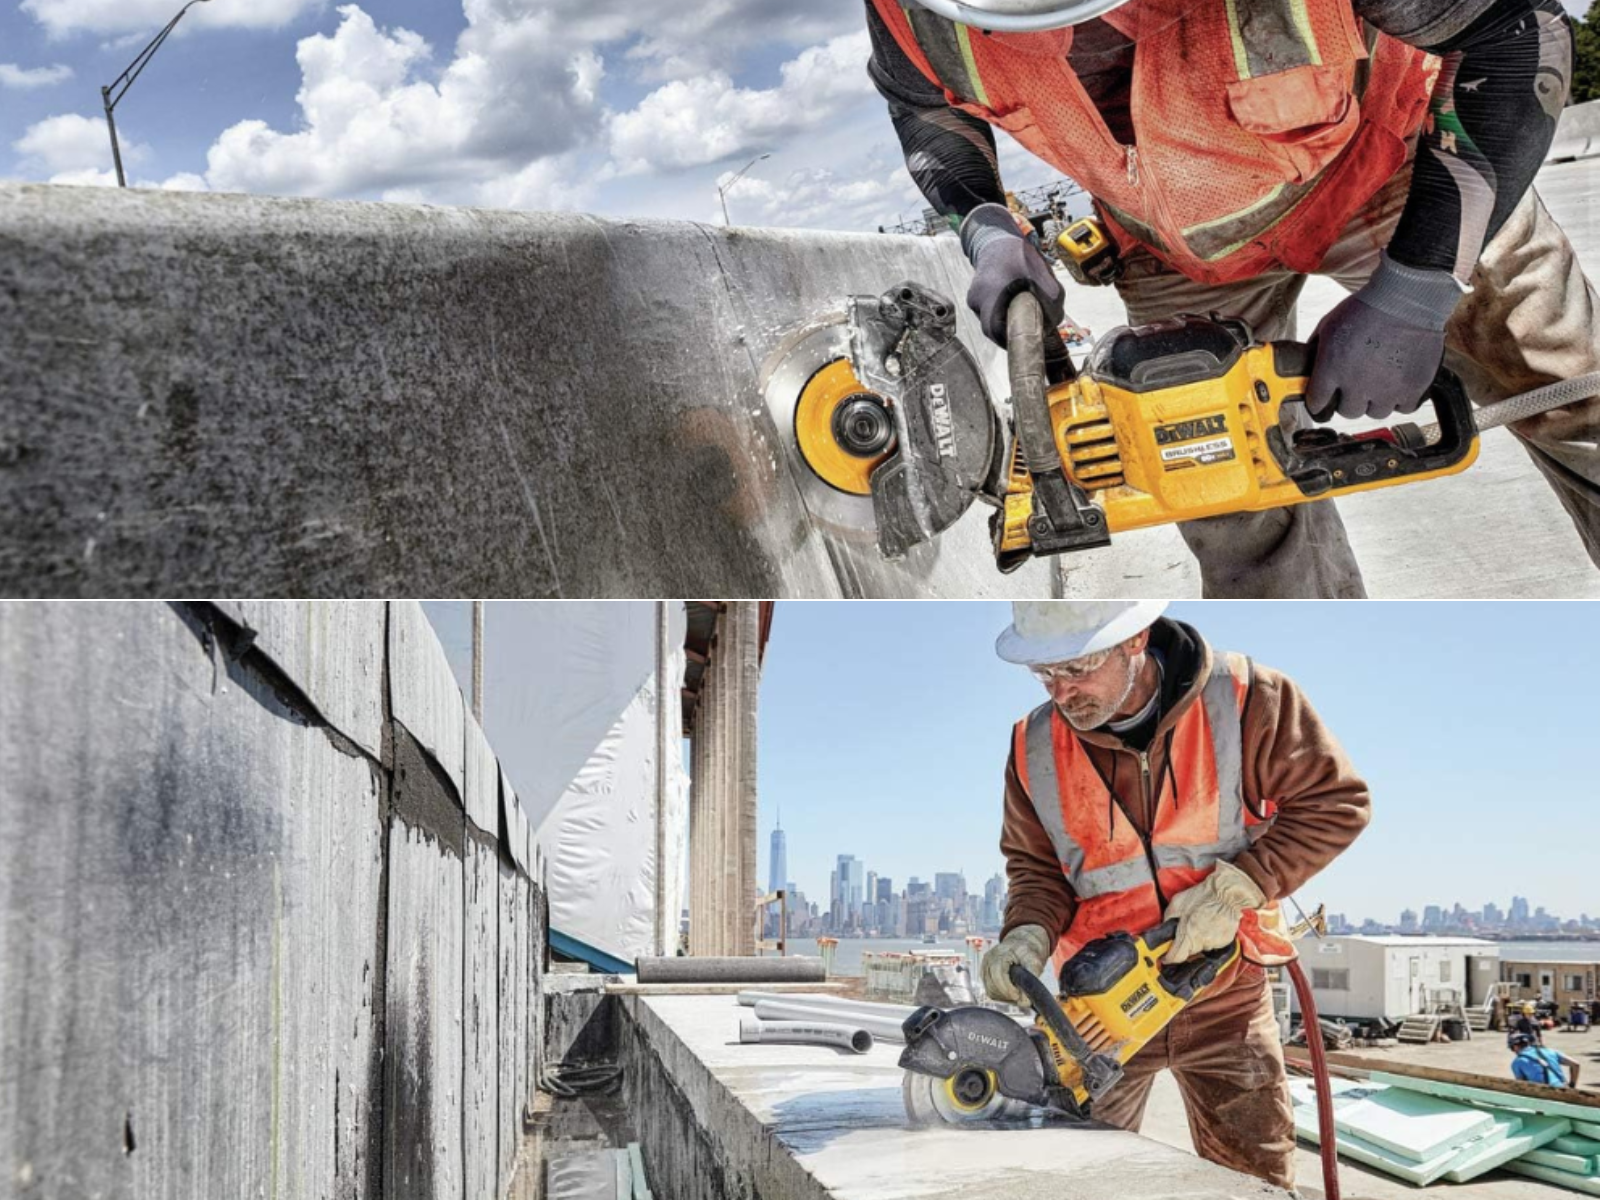 A worker cutting concrete horizontally and another working cutting vertically on a concrete wall.